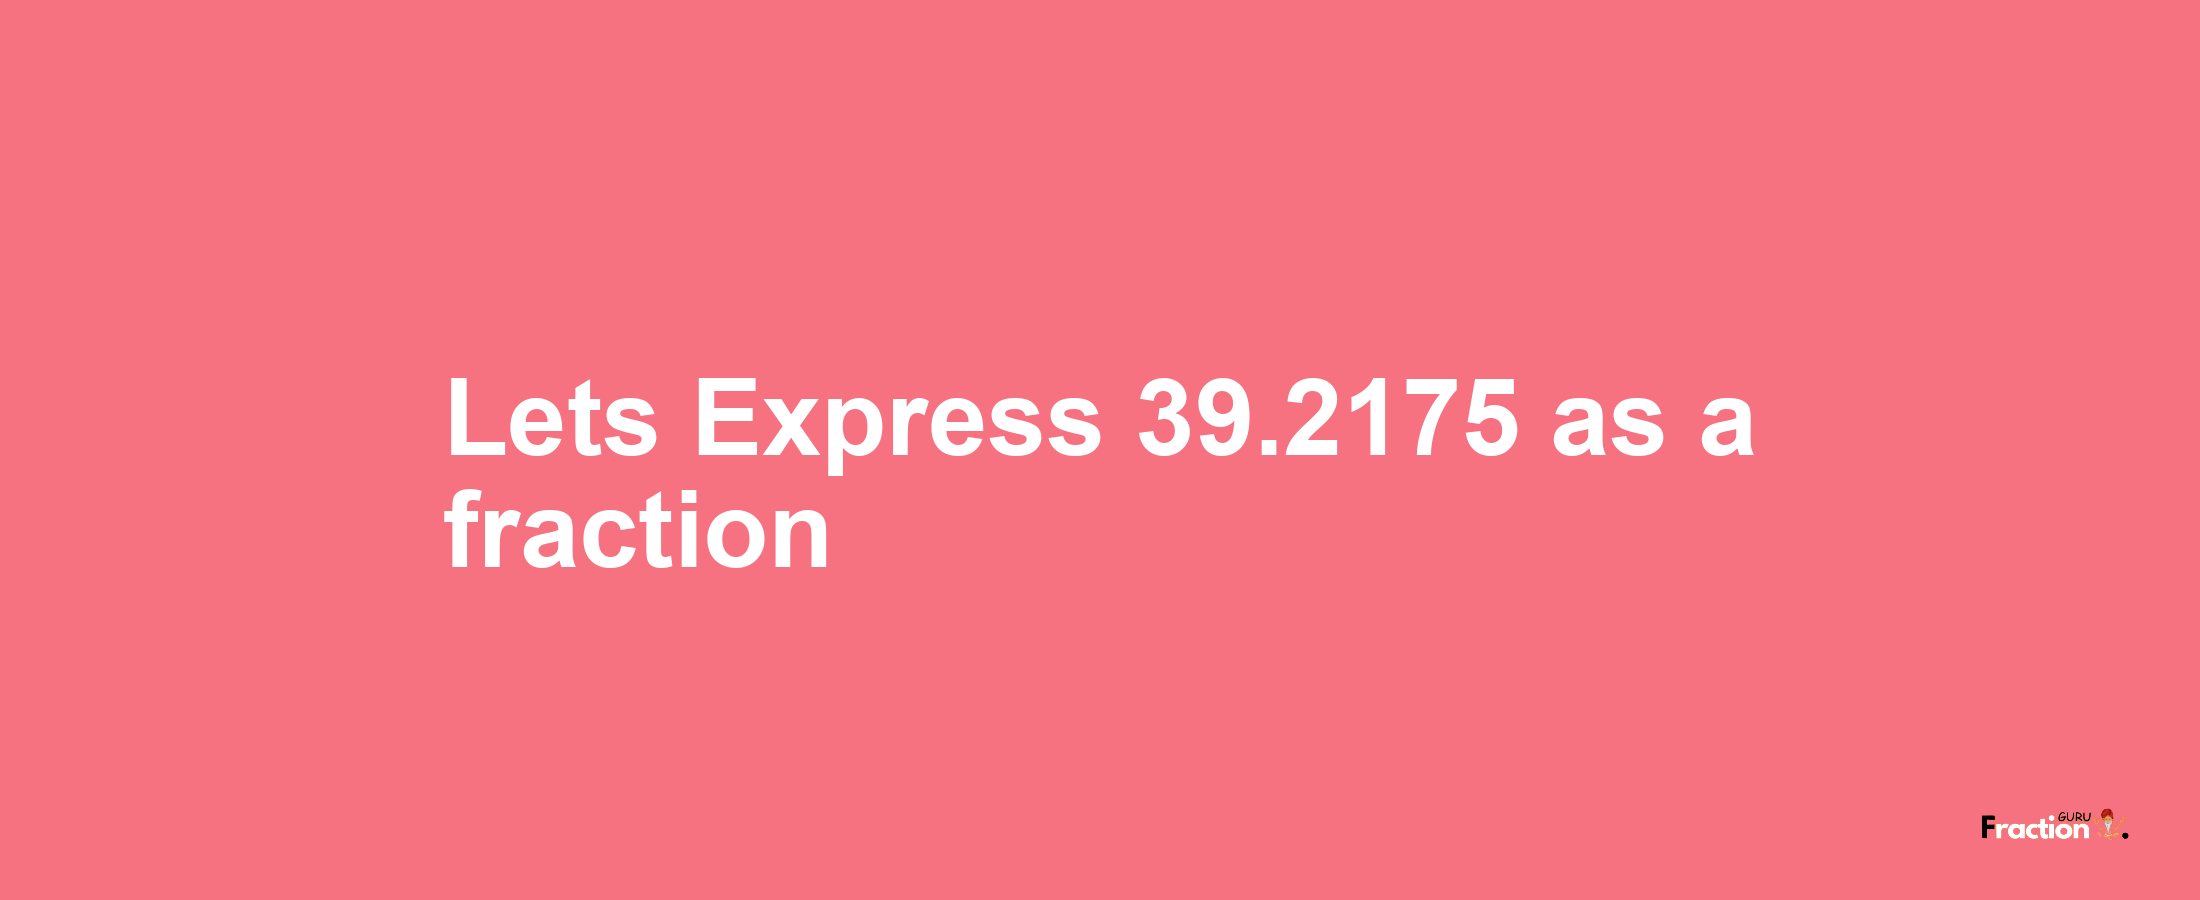 Lets Express 39.2175 as afraction